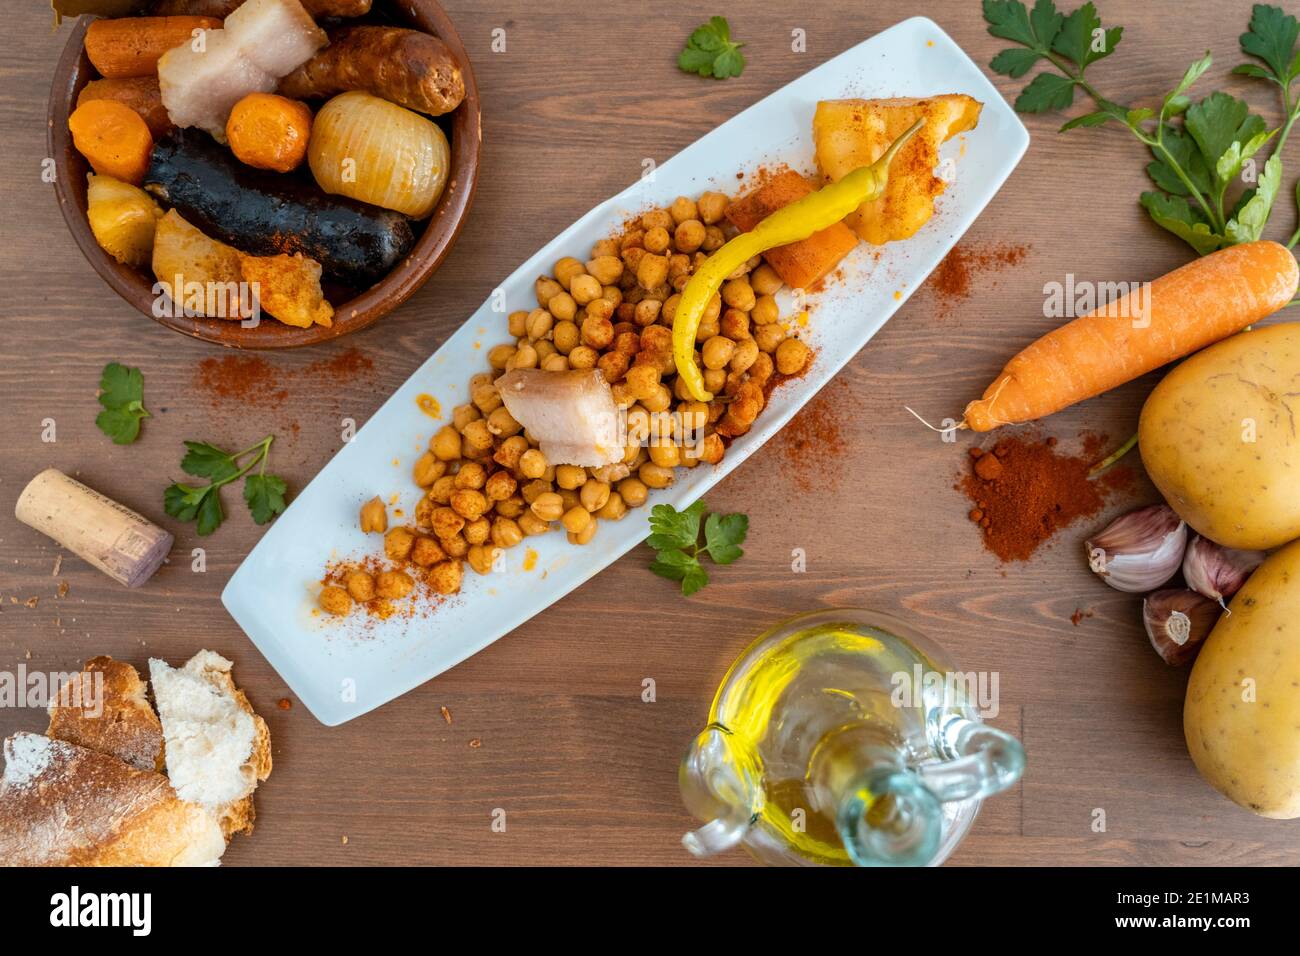 spanish traditional food cocido with chickpea and chorizo black pudding chickpeas bacon carrot potato Stock Photo